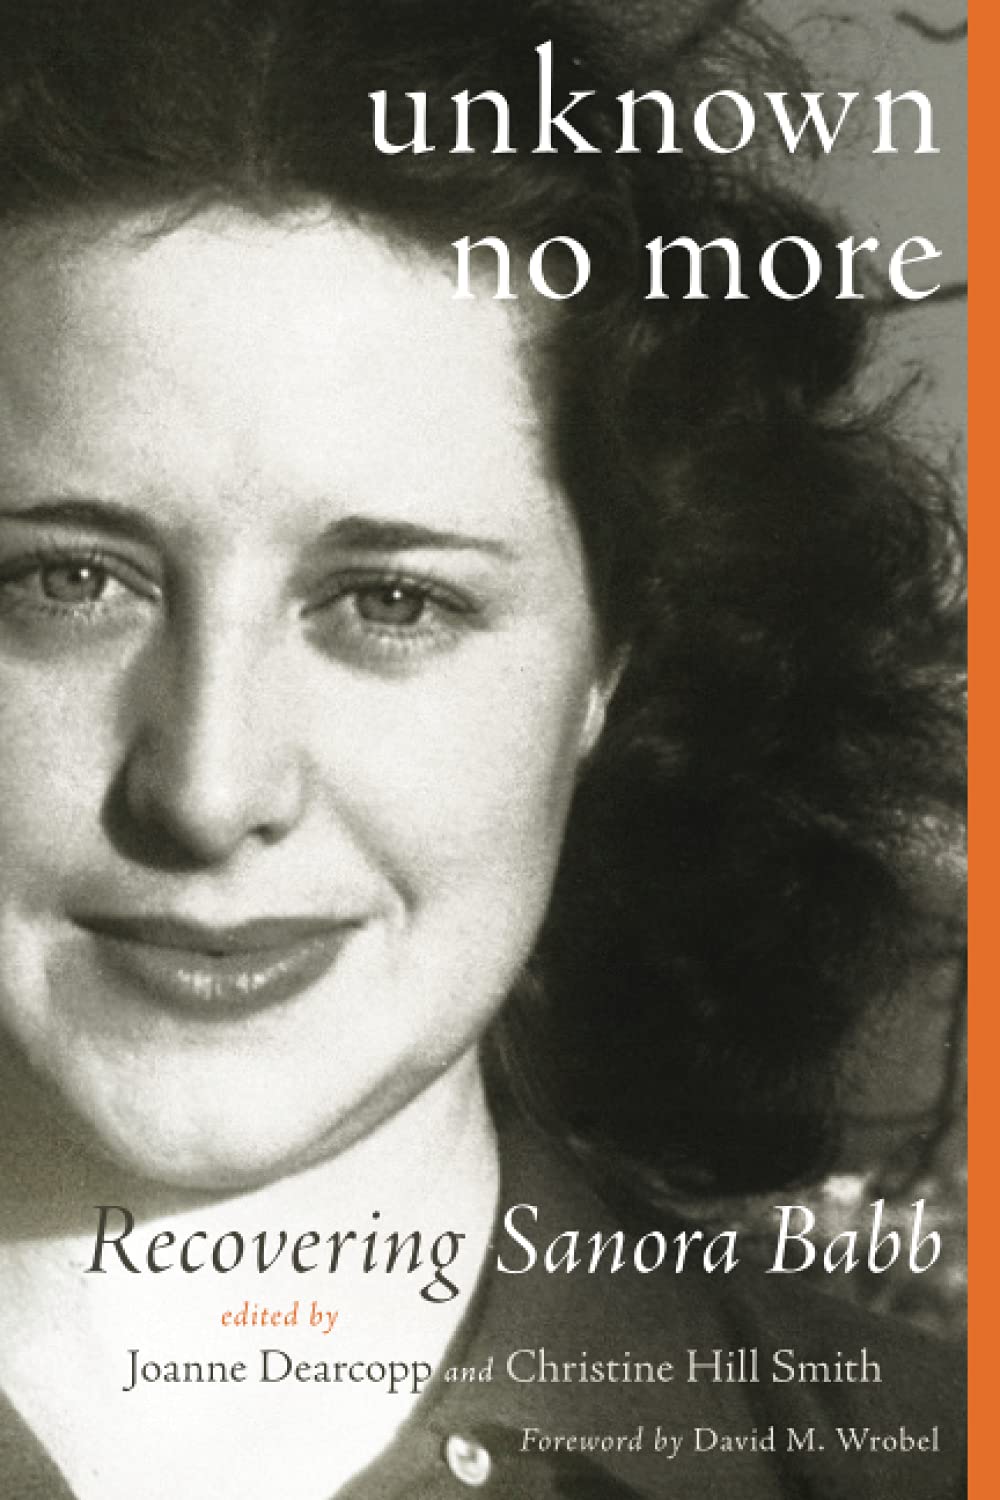 Book Review: Unknown no more: Recovering Sanora Babb